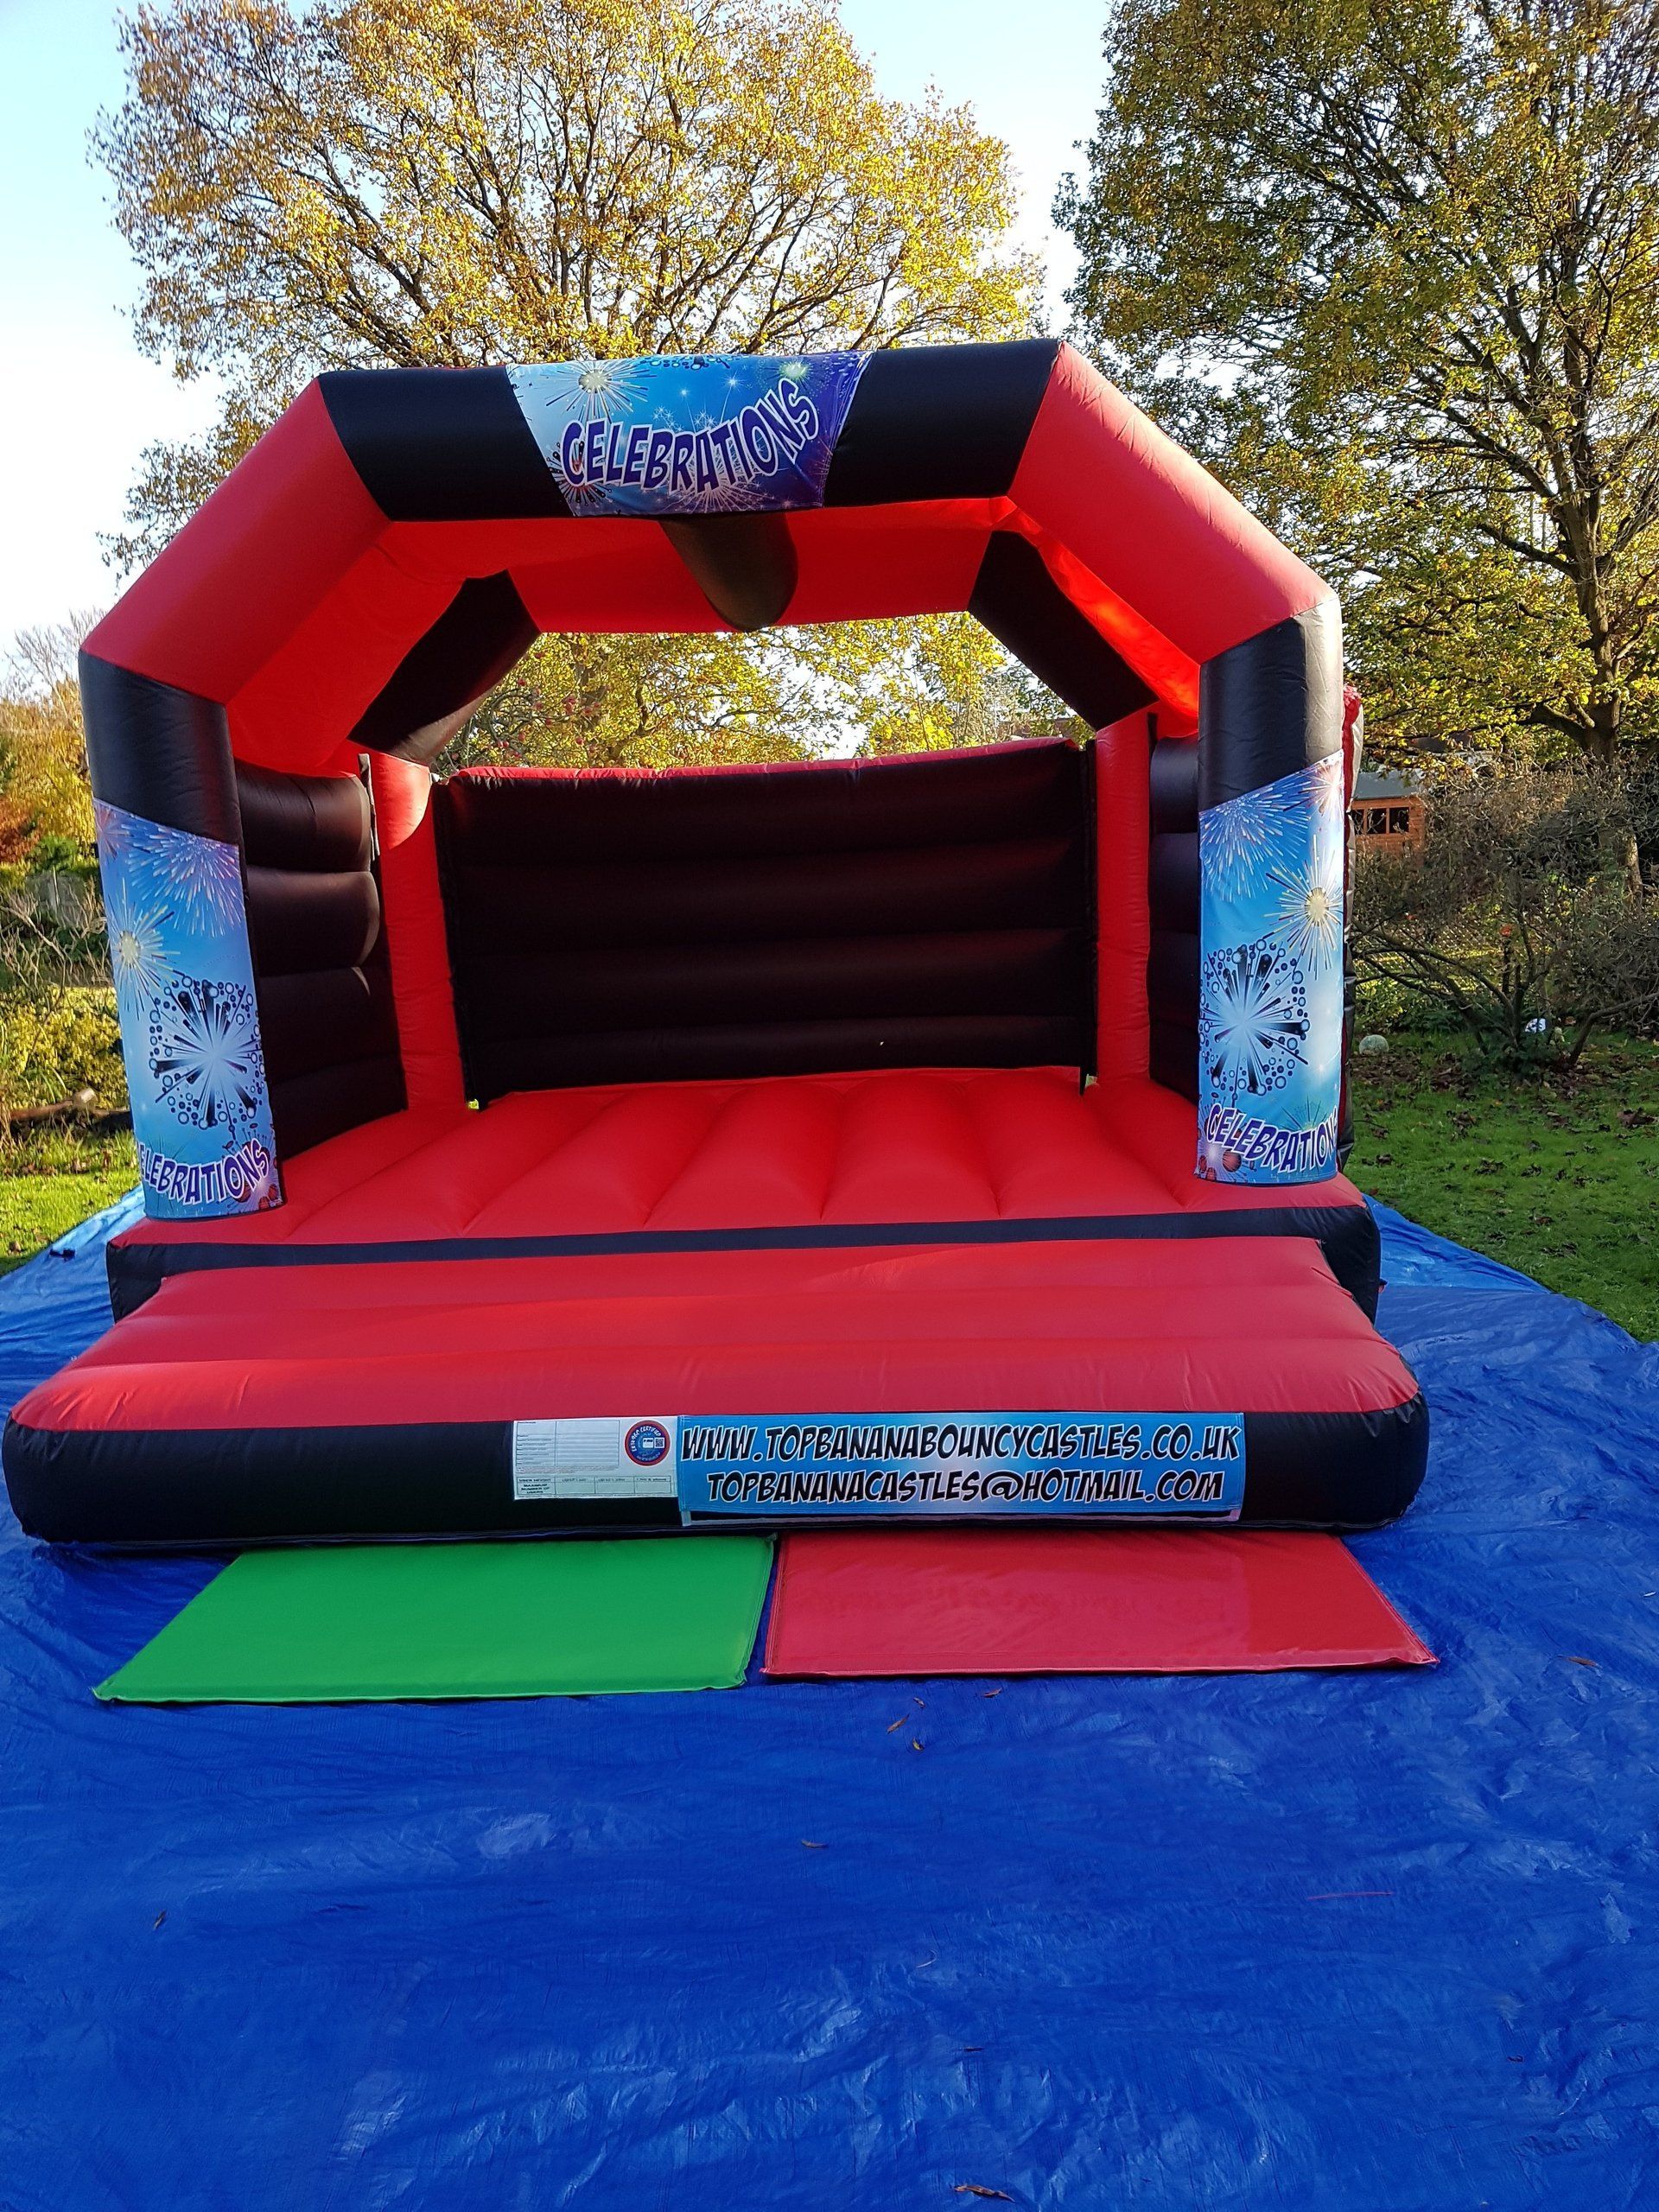 red and black adult bouncy castle with celebration artwork